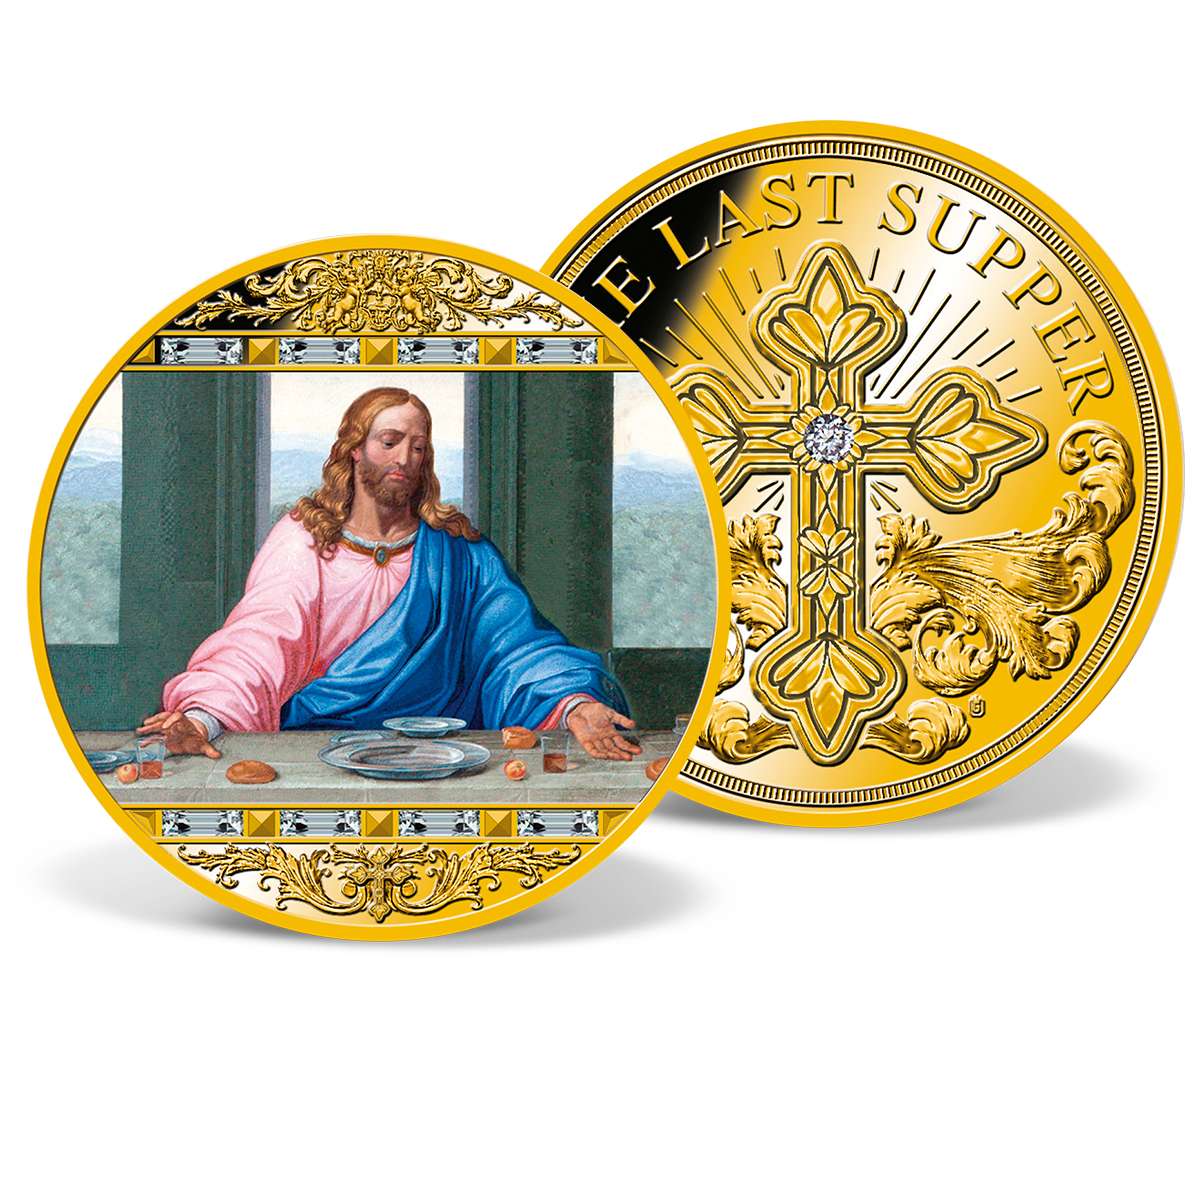 Jesus last supper commemorative coin collection collectible christmas gift G$